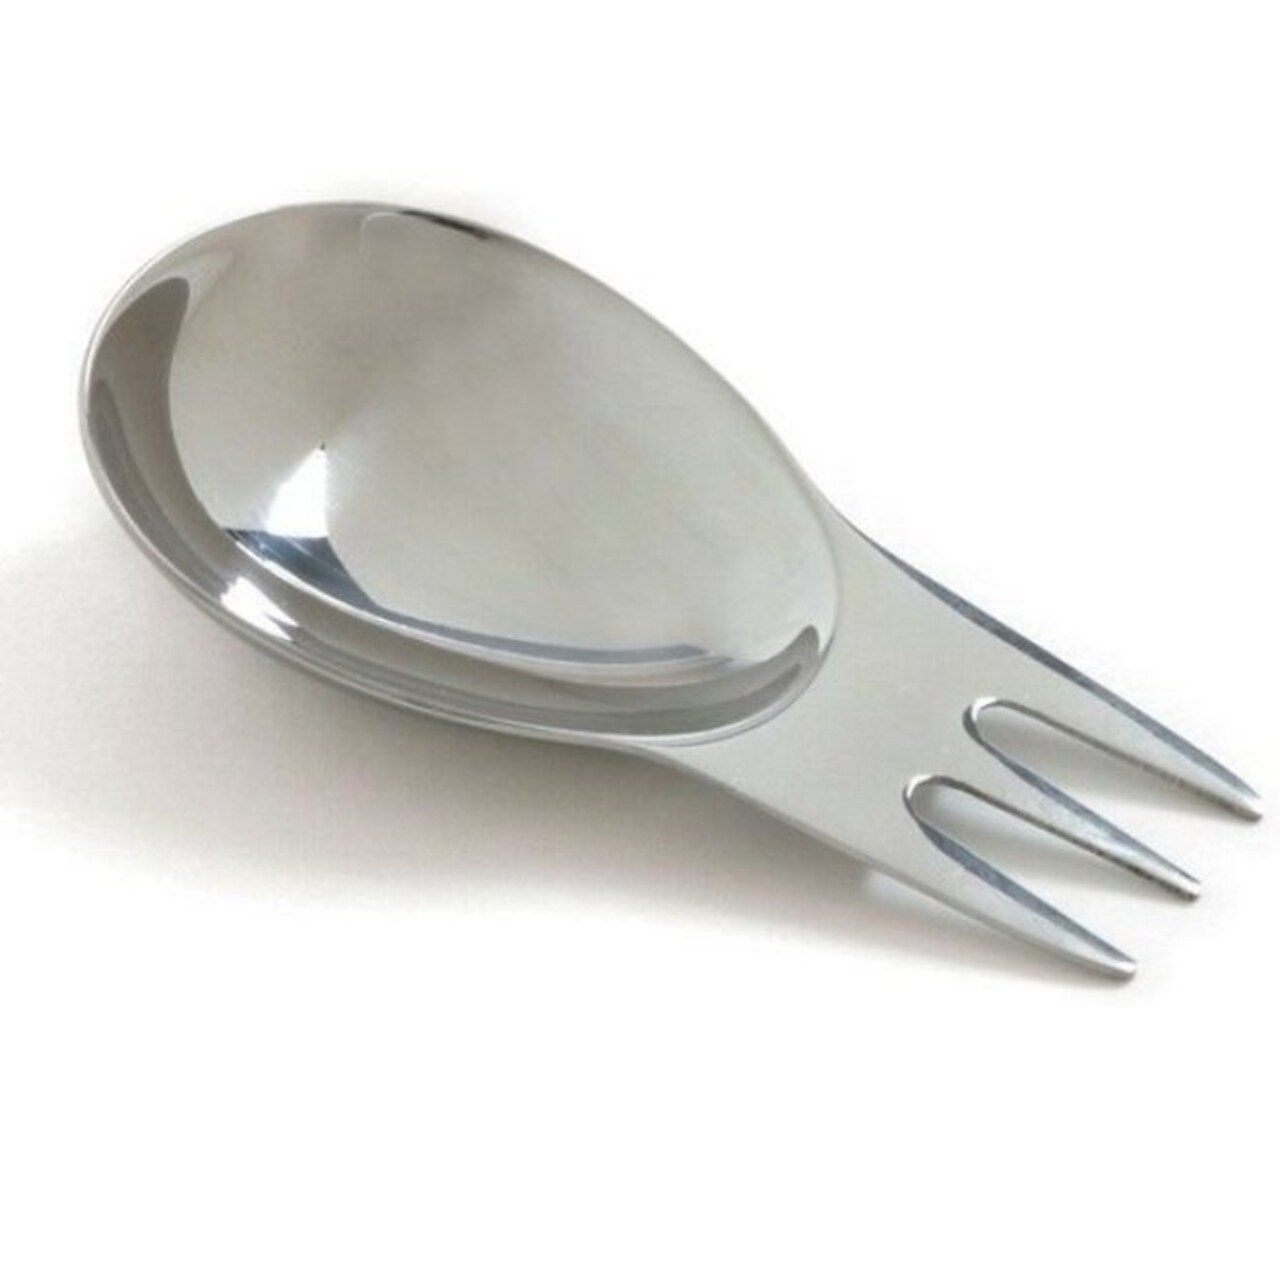 Norpro Stainless Steel Spork - Camping Hiking Party Appetizer